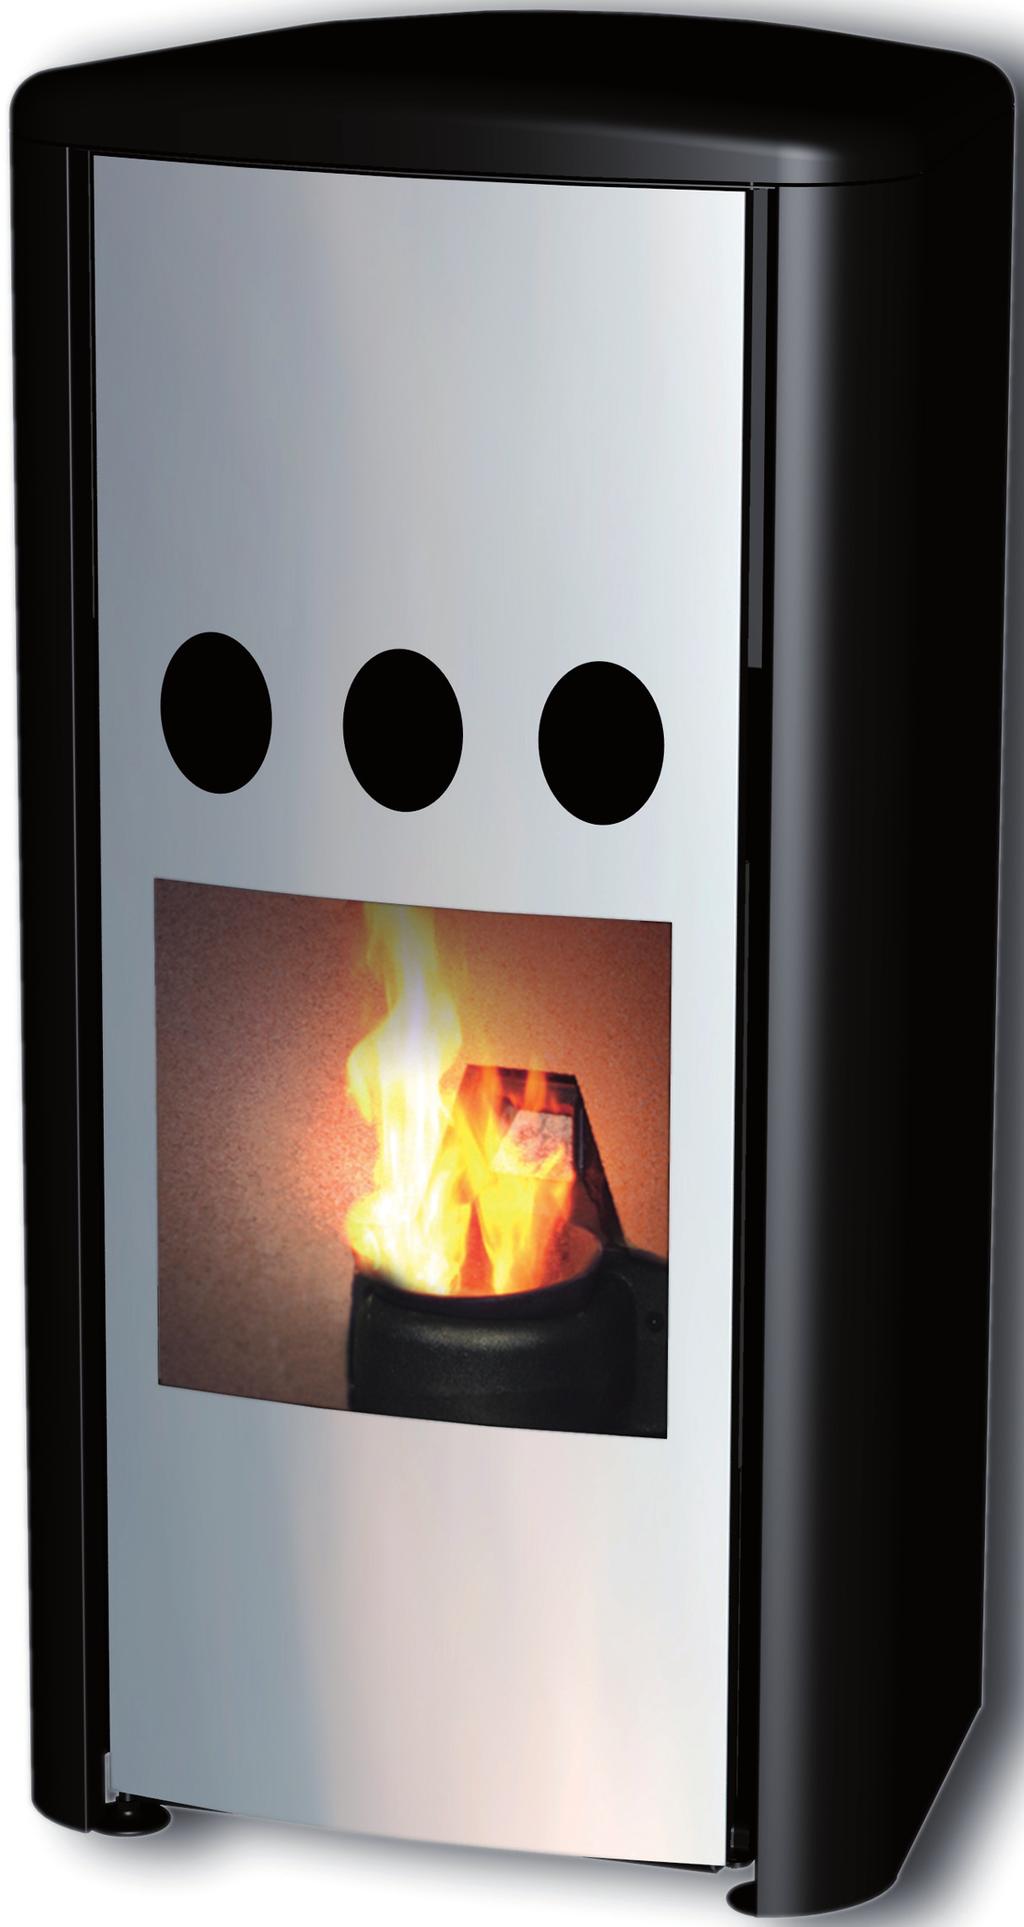 ARITERM PELLET SYSTEM For a sustainable future PELLET STOVE KMP LILLA FRÖ Tradition and elegance - in a small format Despite its small size and light weight, KMP Lilla Frö is a fully grown stove with